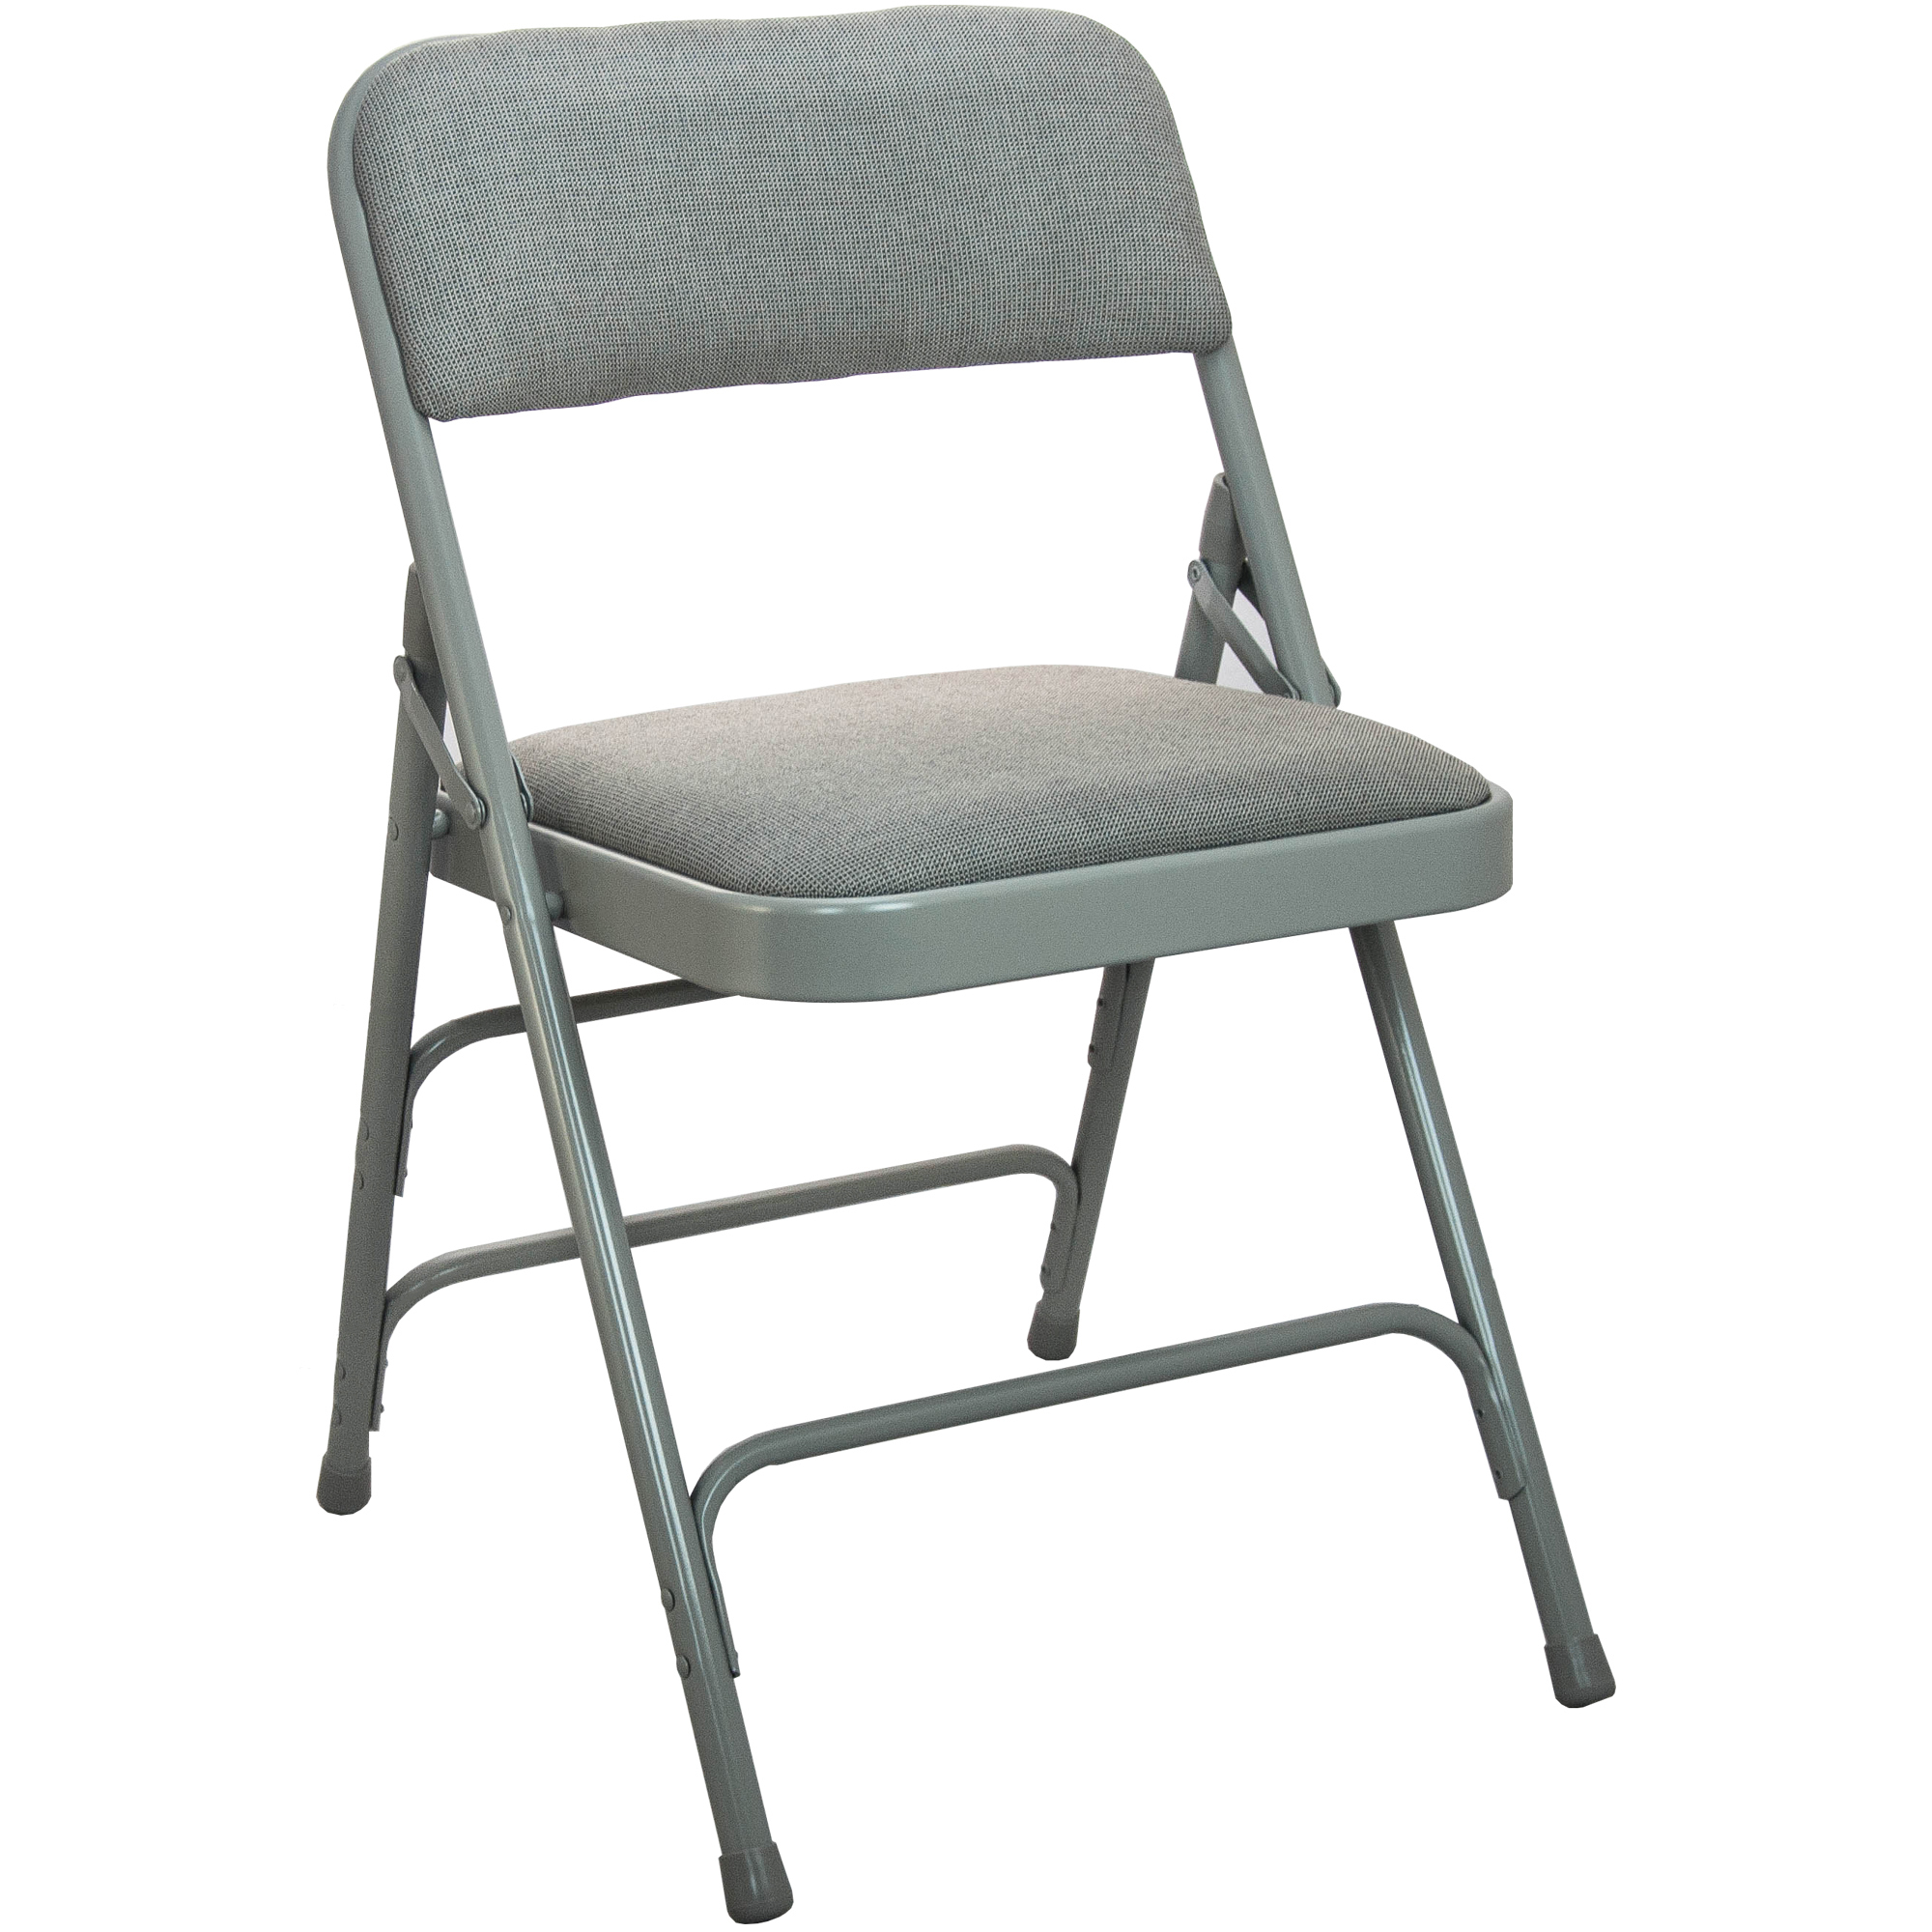 Flash Furniture, 2PK Grey Padded Metal Folding Chair-1Inch Fabric Seat, Primary Color Gray, Included (qty.) 2, Model DPI903FGG2